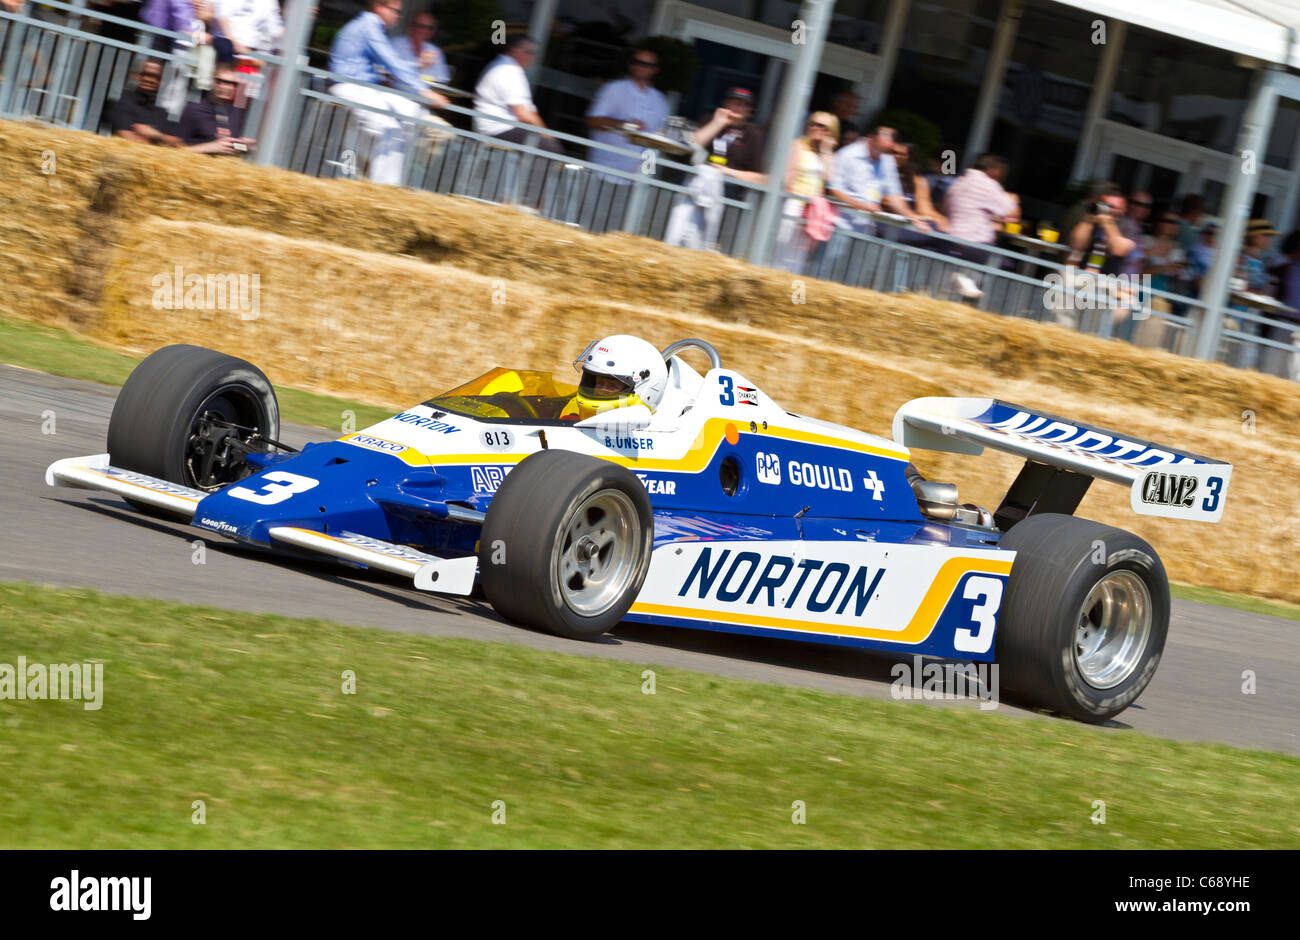 1981 Penske-Cosworth PC9B with driver Bobby Unser at the 2011 Goodwood Festival of Speed, Sussex, England, UK. Stock Photo